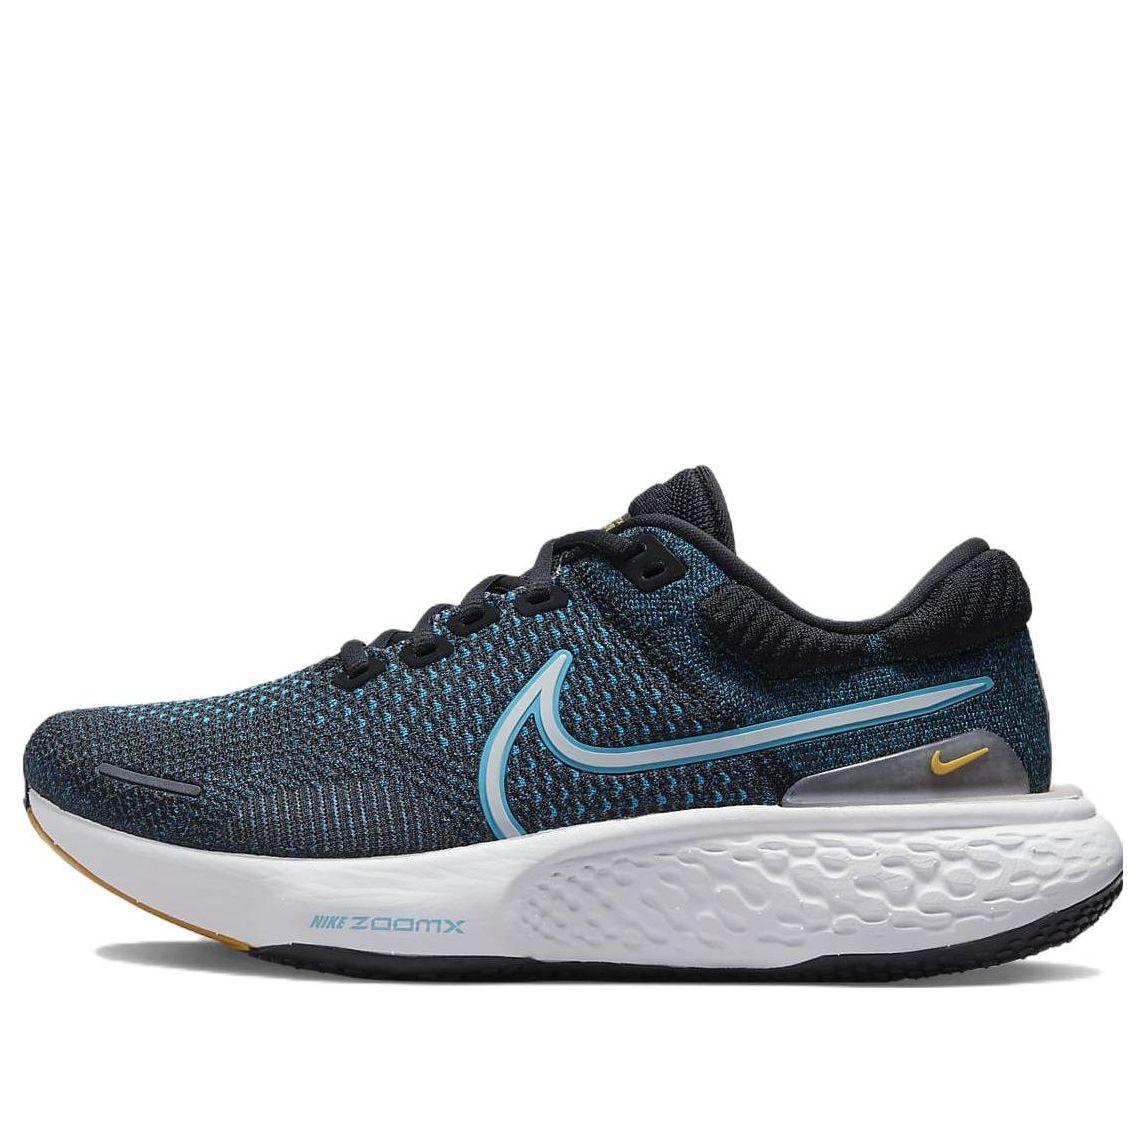 Nike Invincible Run Flyknit 2 DH5425-003 - Live Life Egypt